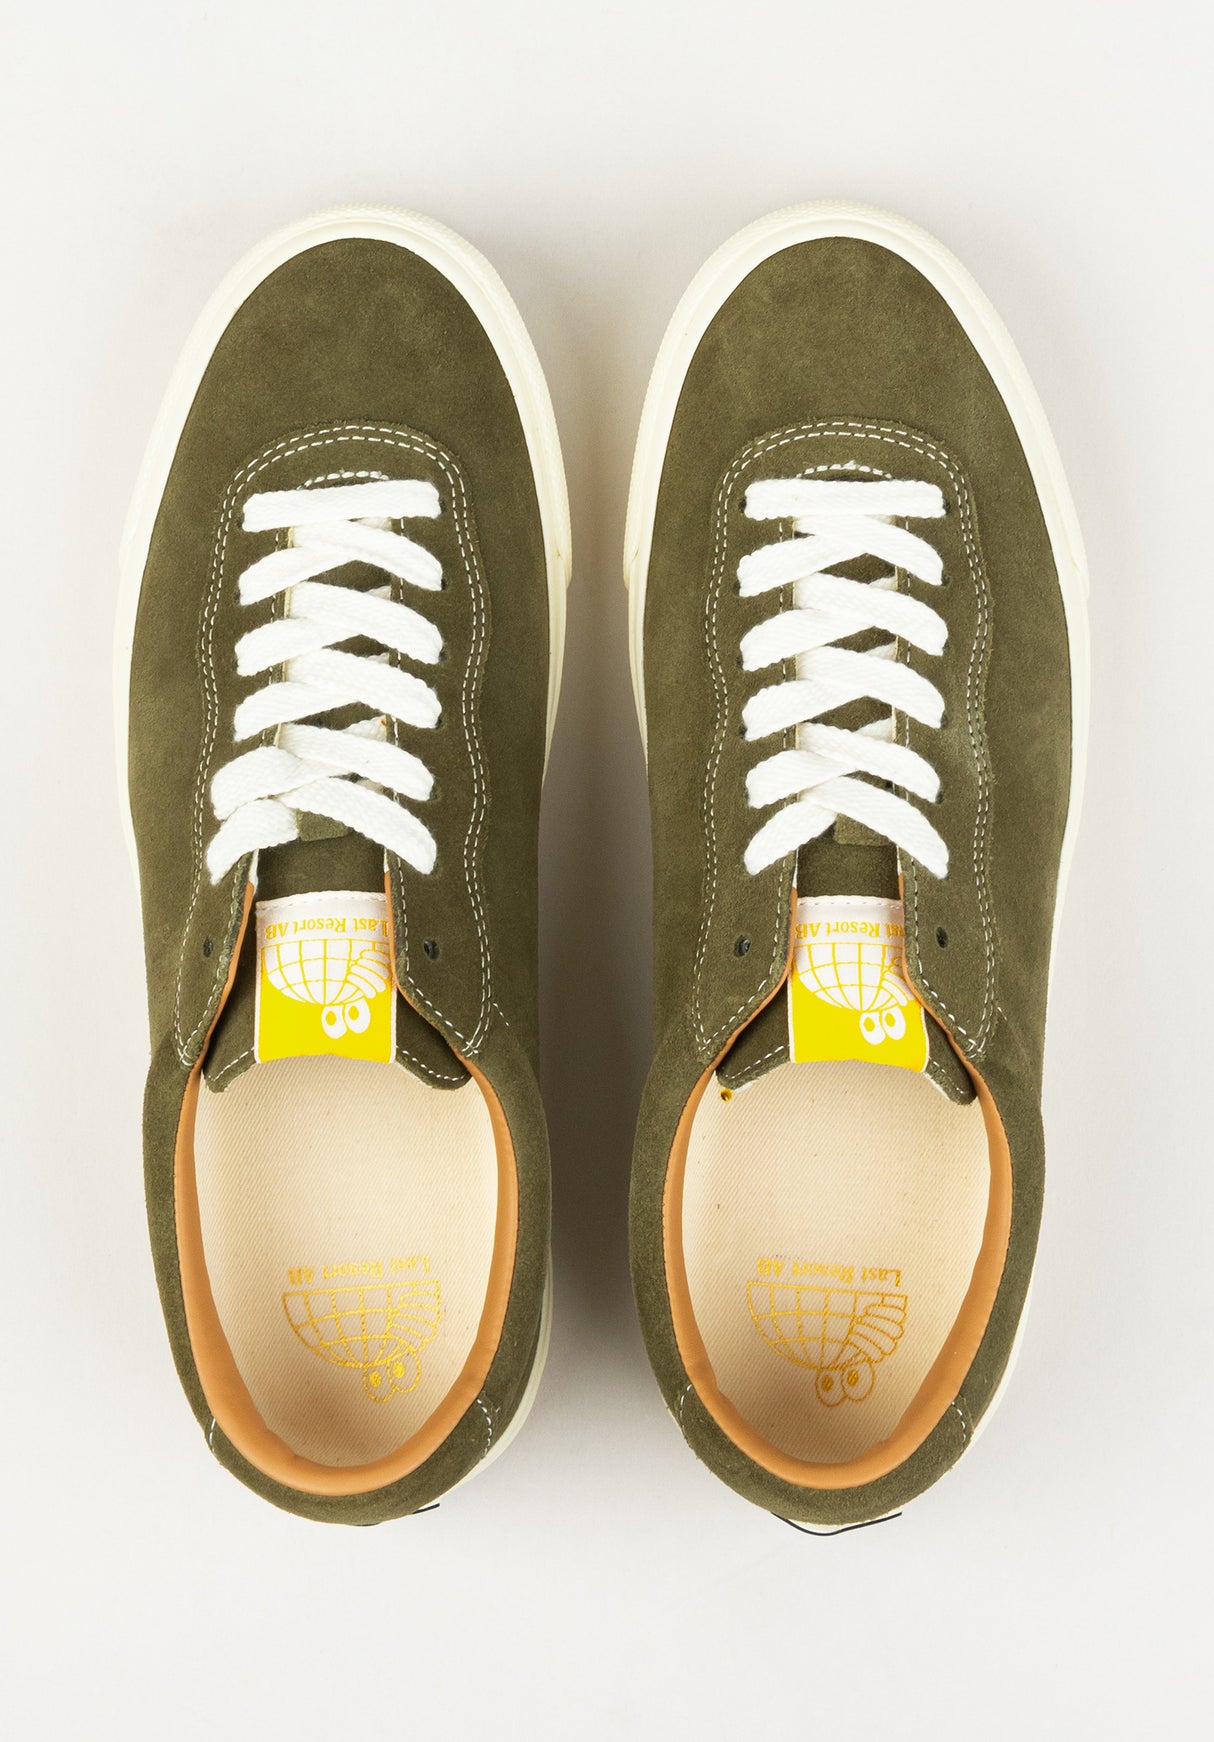 VM001 Suede Low dustygreen-white Close-Up2